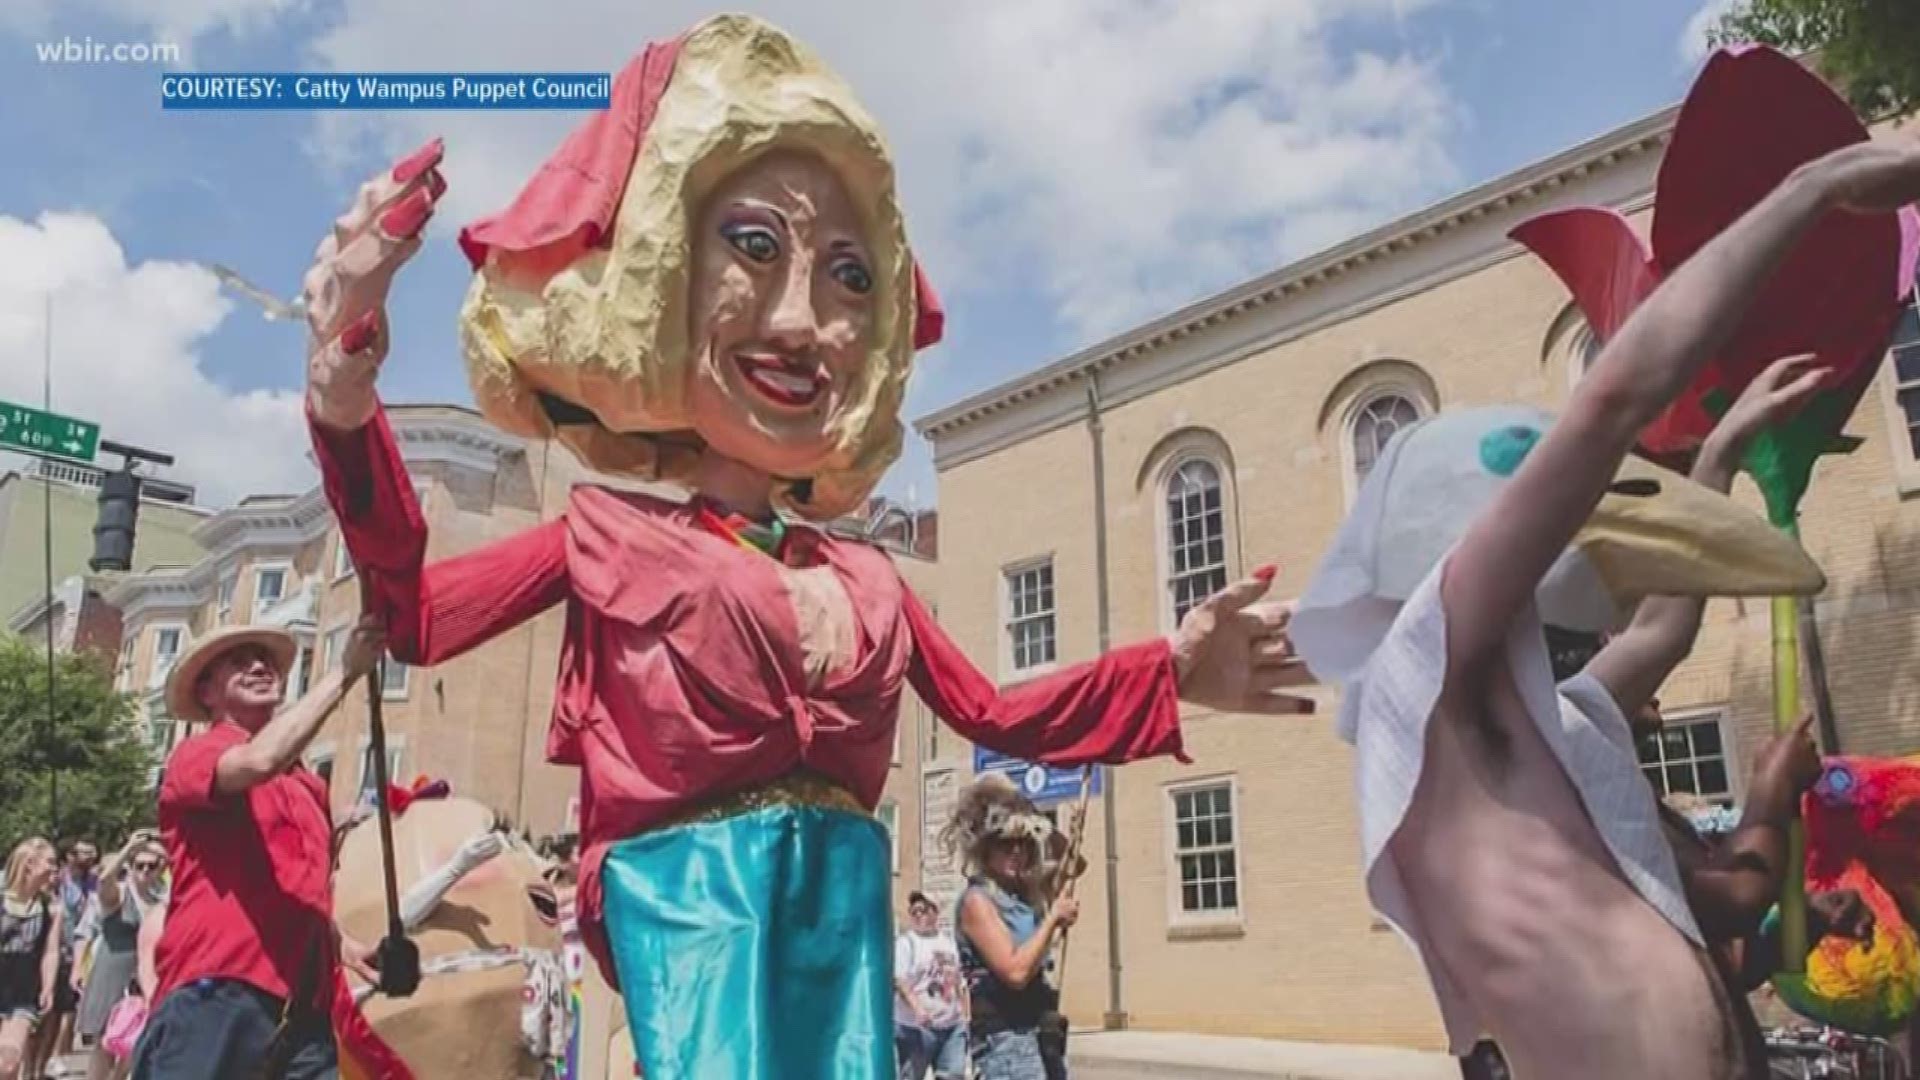 Someone is now the new owner of a Giant Dolly Parton Parade puppet.